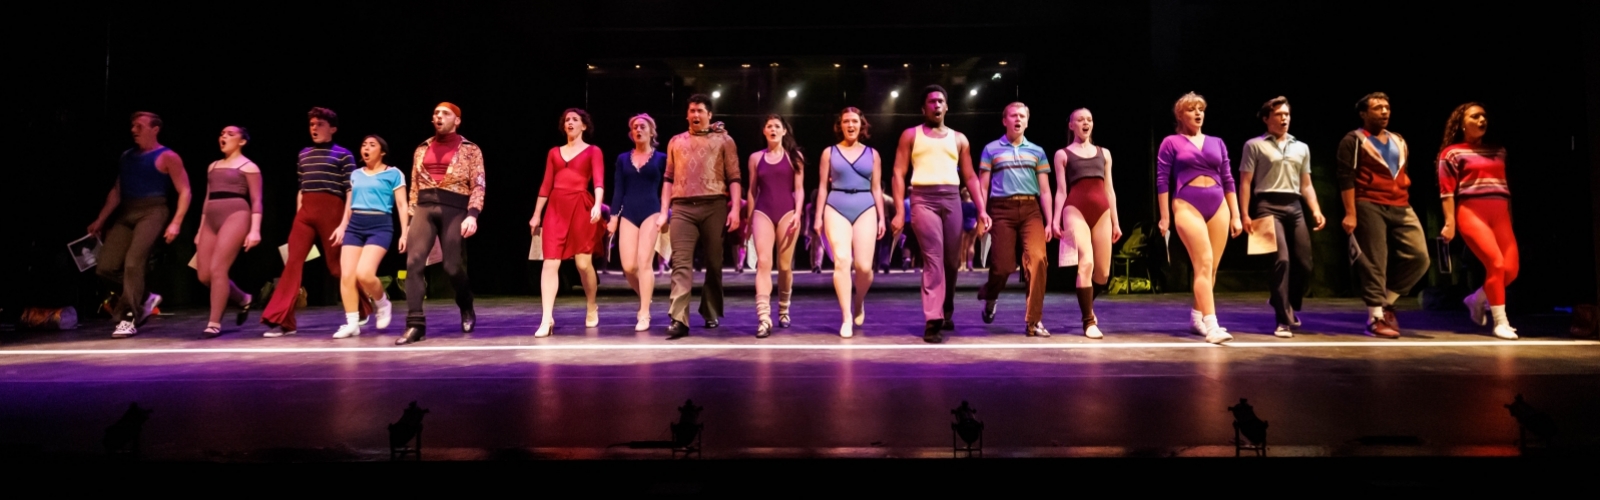 The cast of A Chorus Line stand in line.